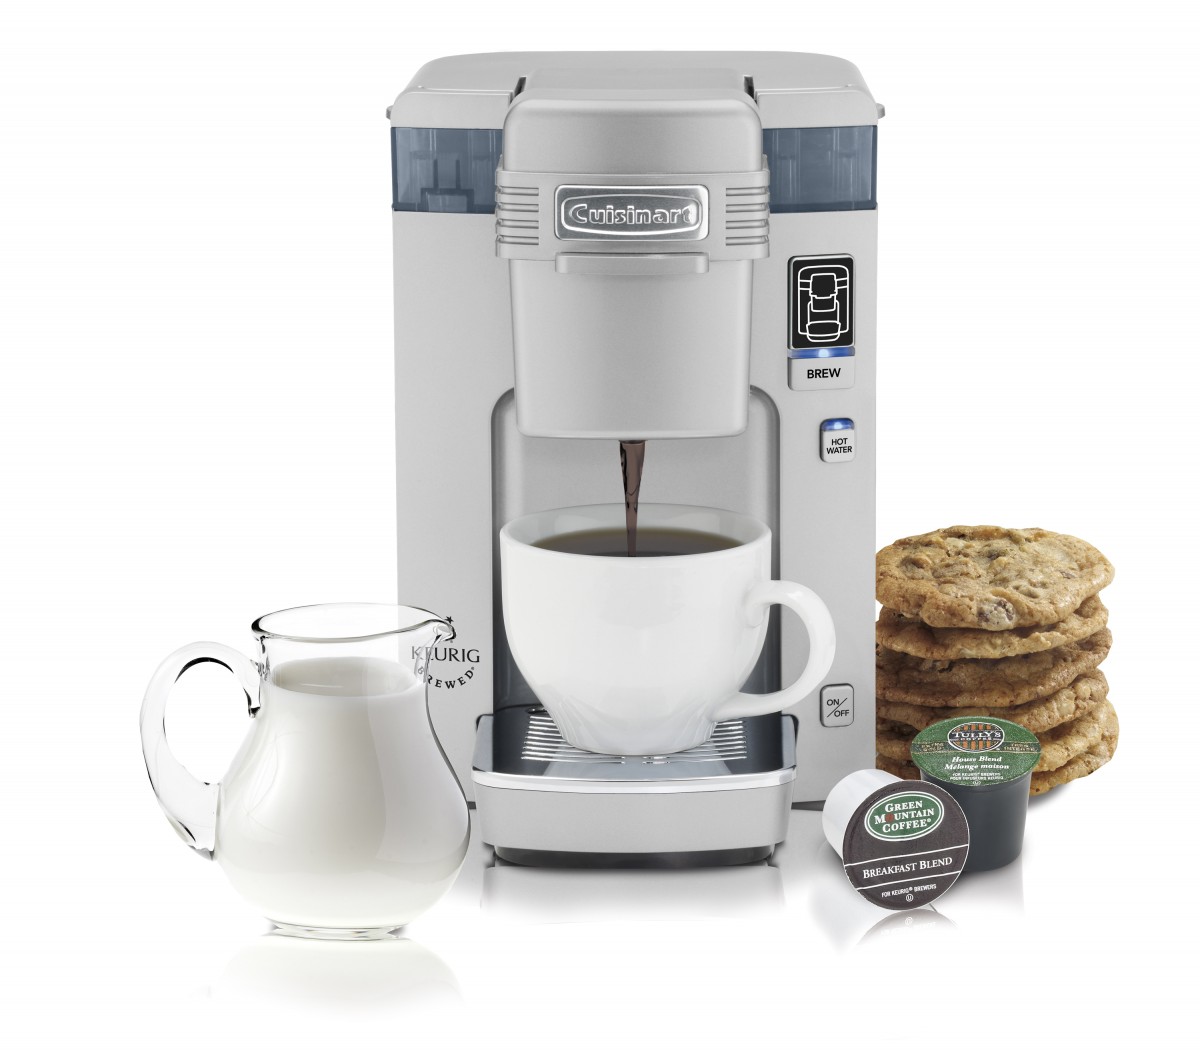 Mother's Day Gift Idea - Coffee Machine